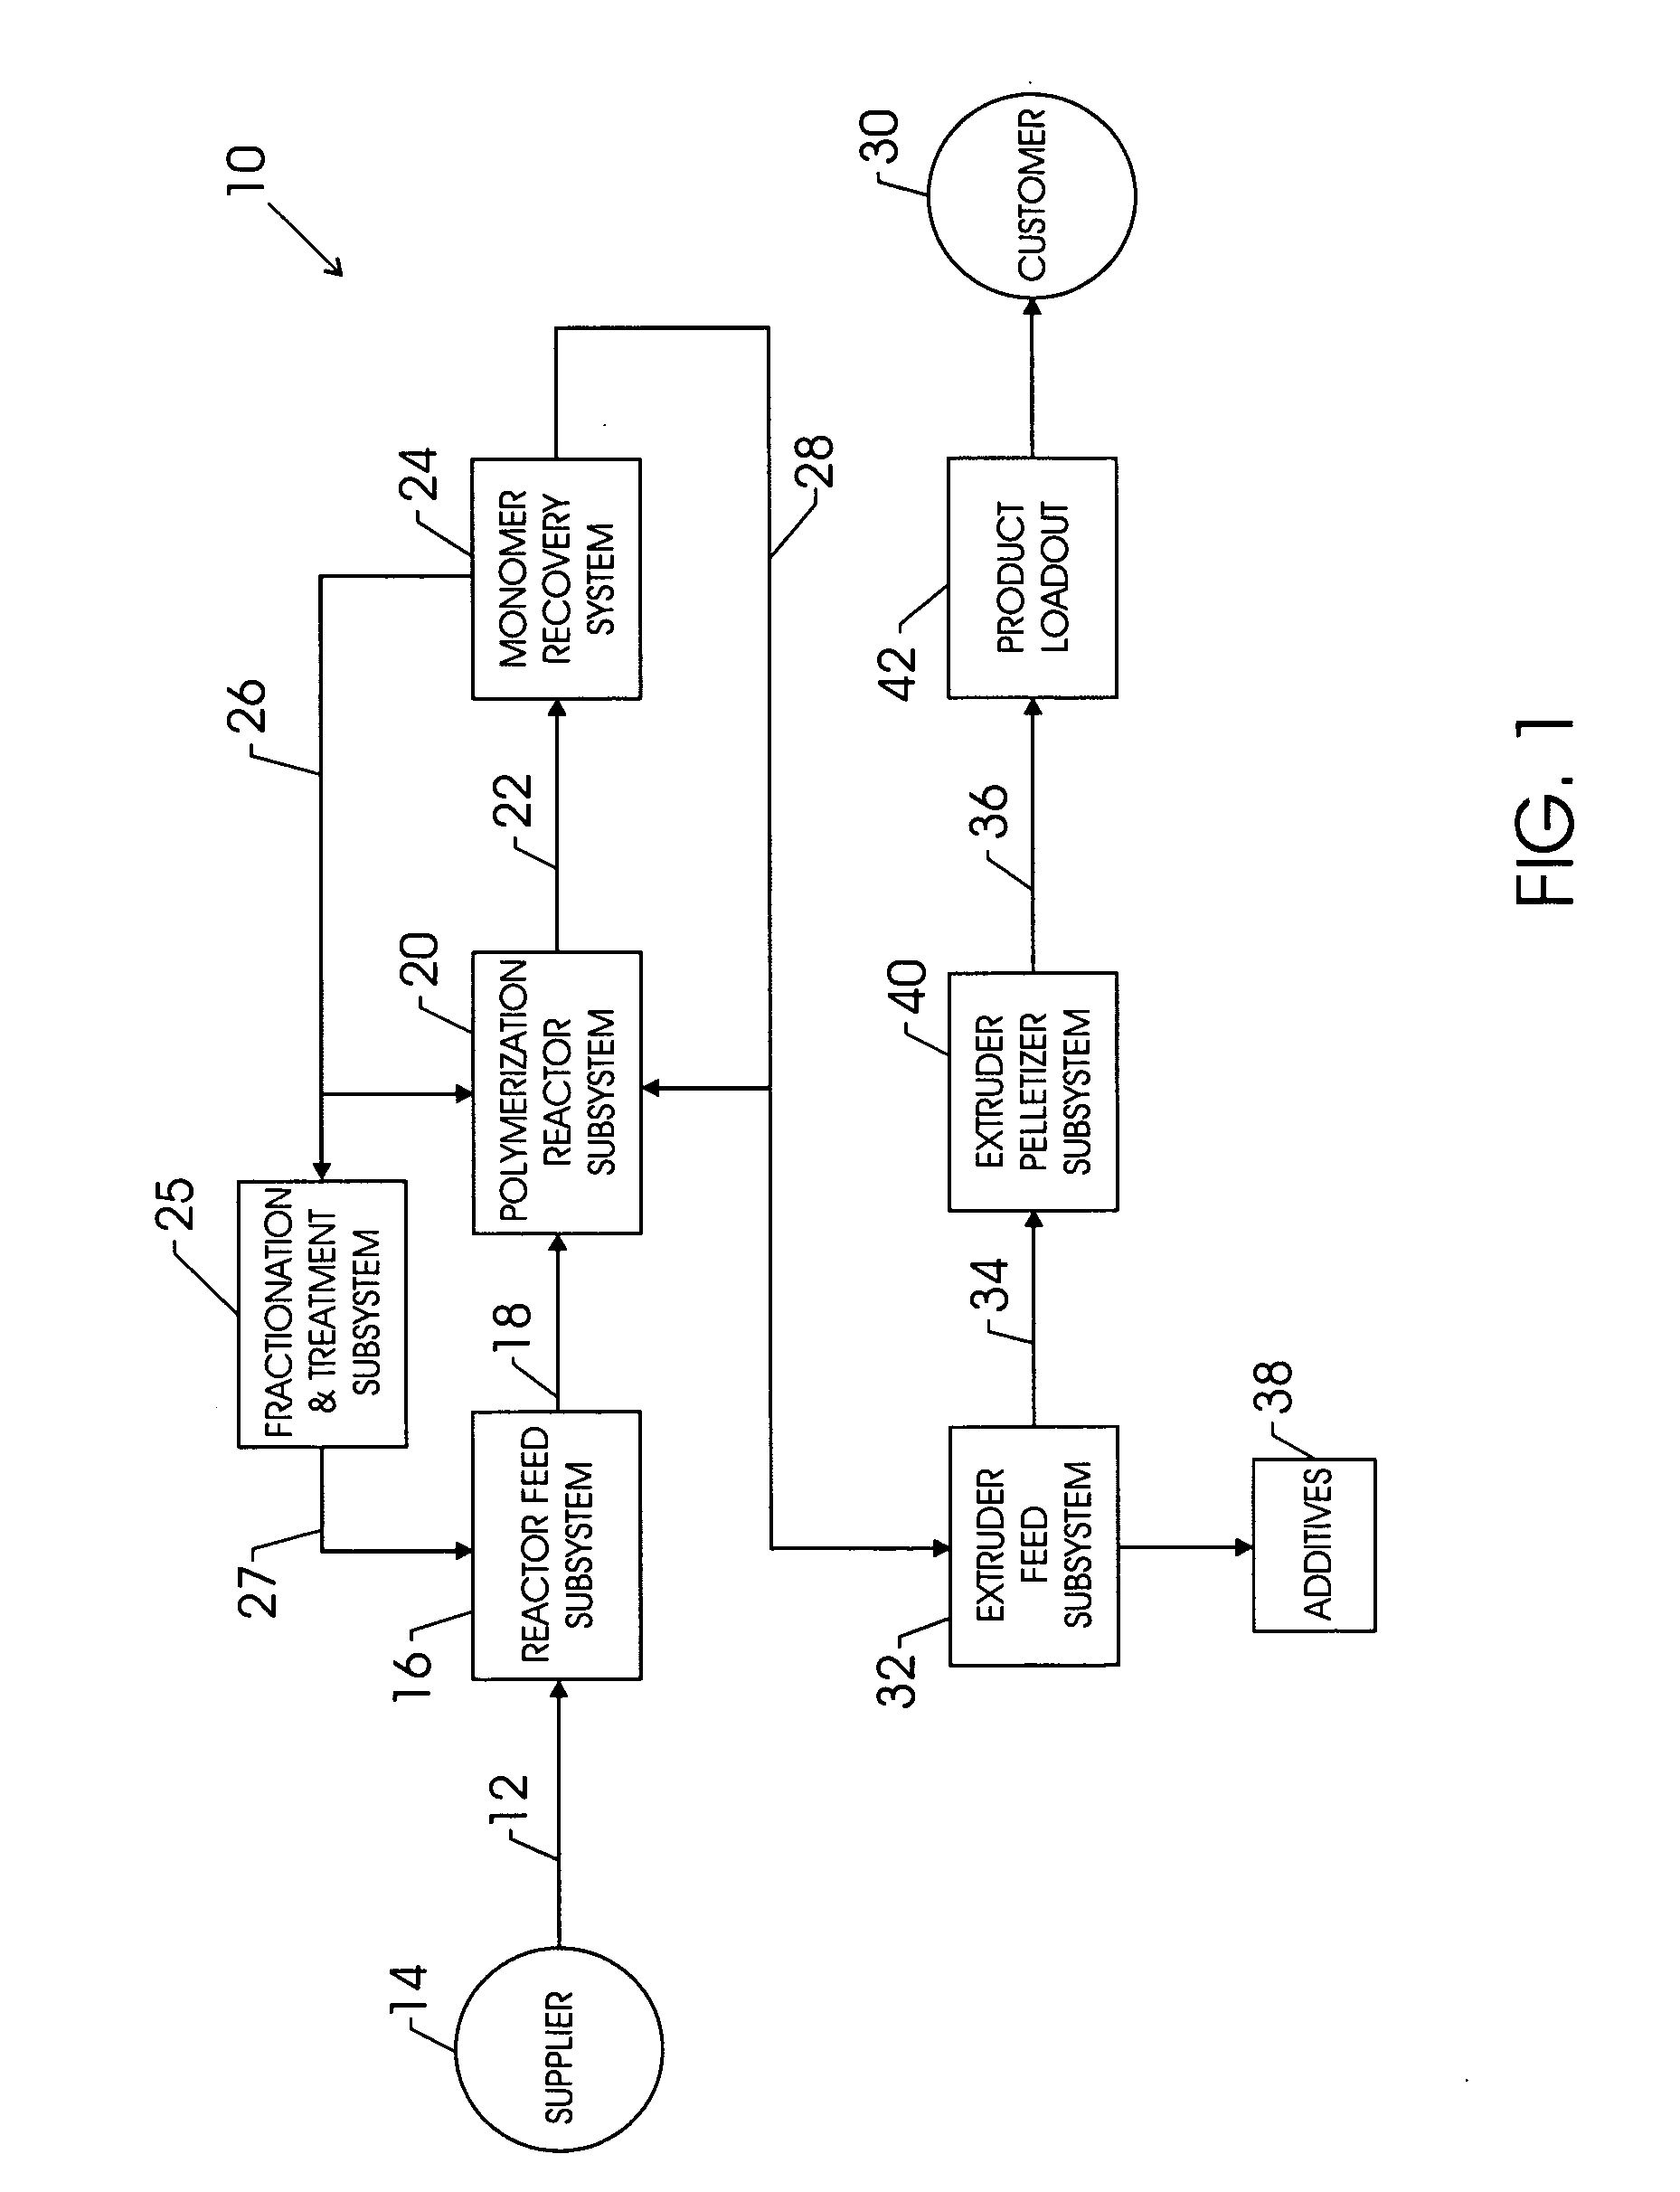 Method and apparatus for monitoring polyolefin production